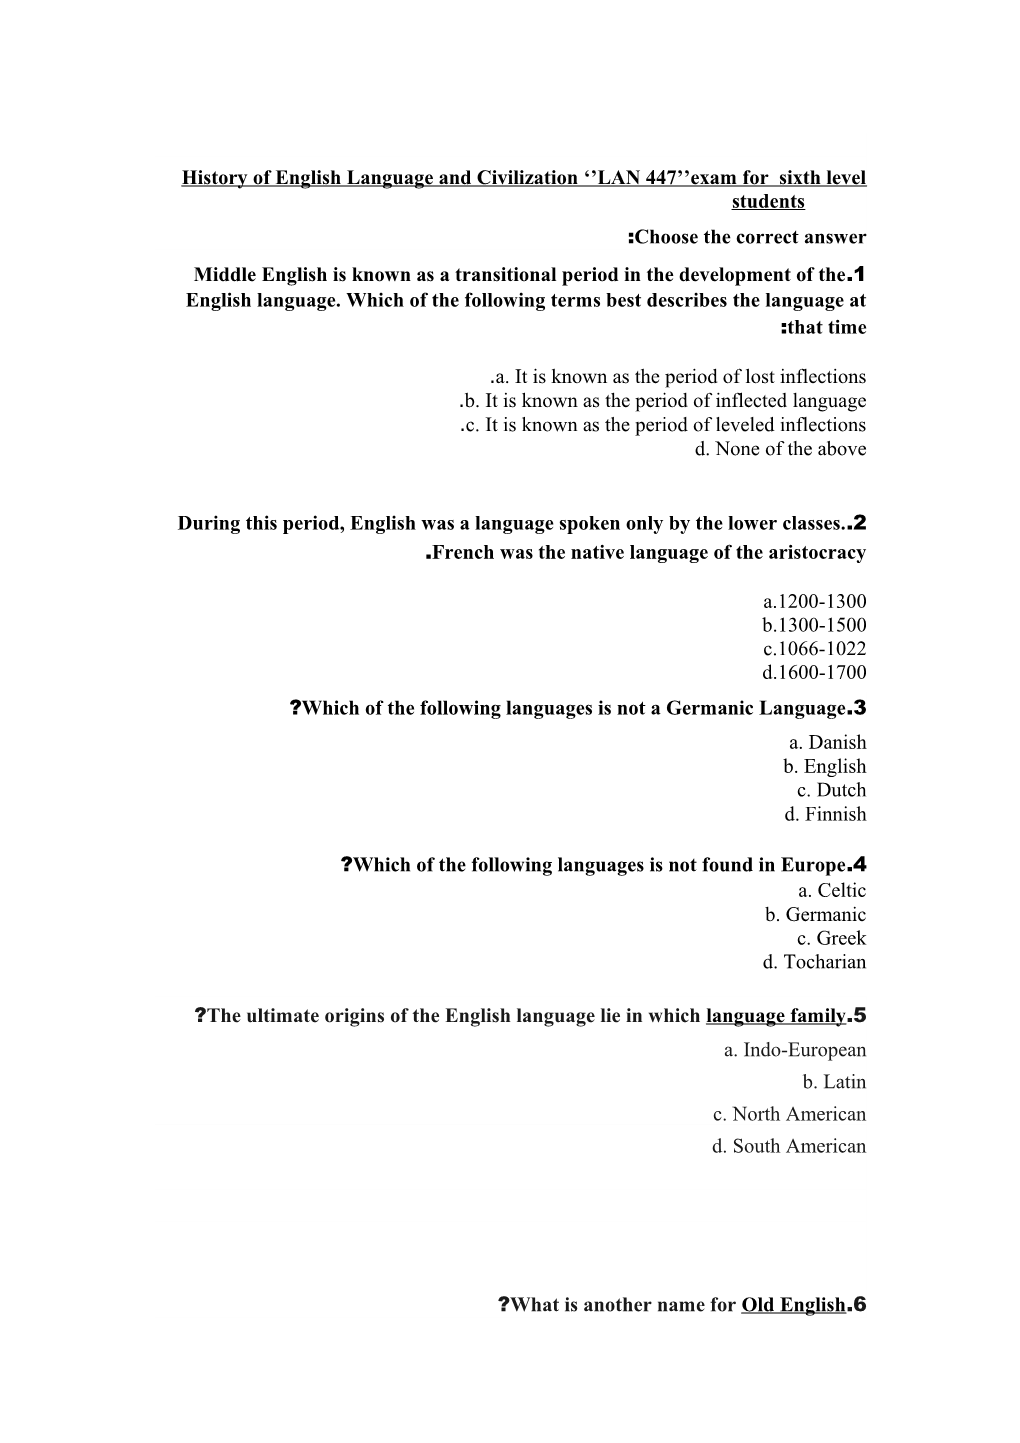 History of English Language and Civilization LAN 447 Exam for Sixth Level Students